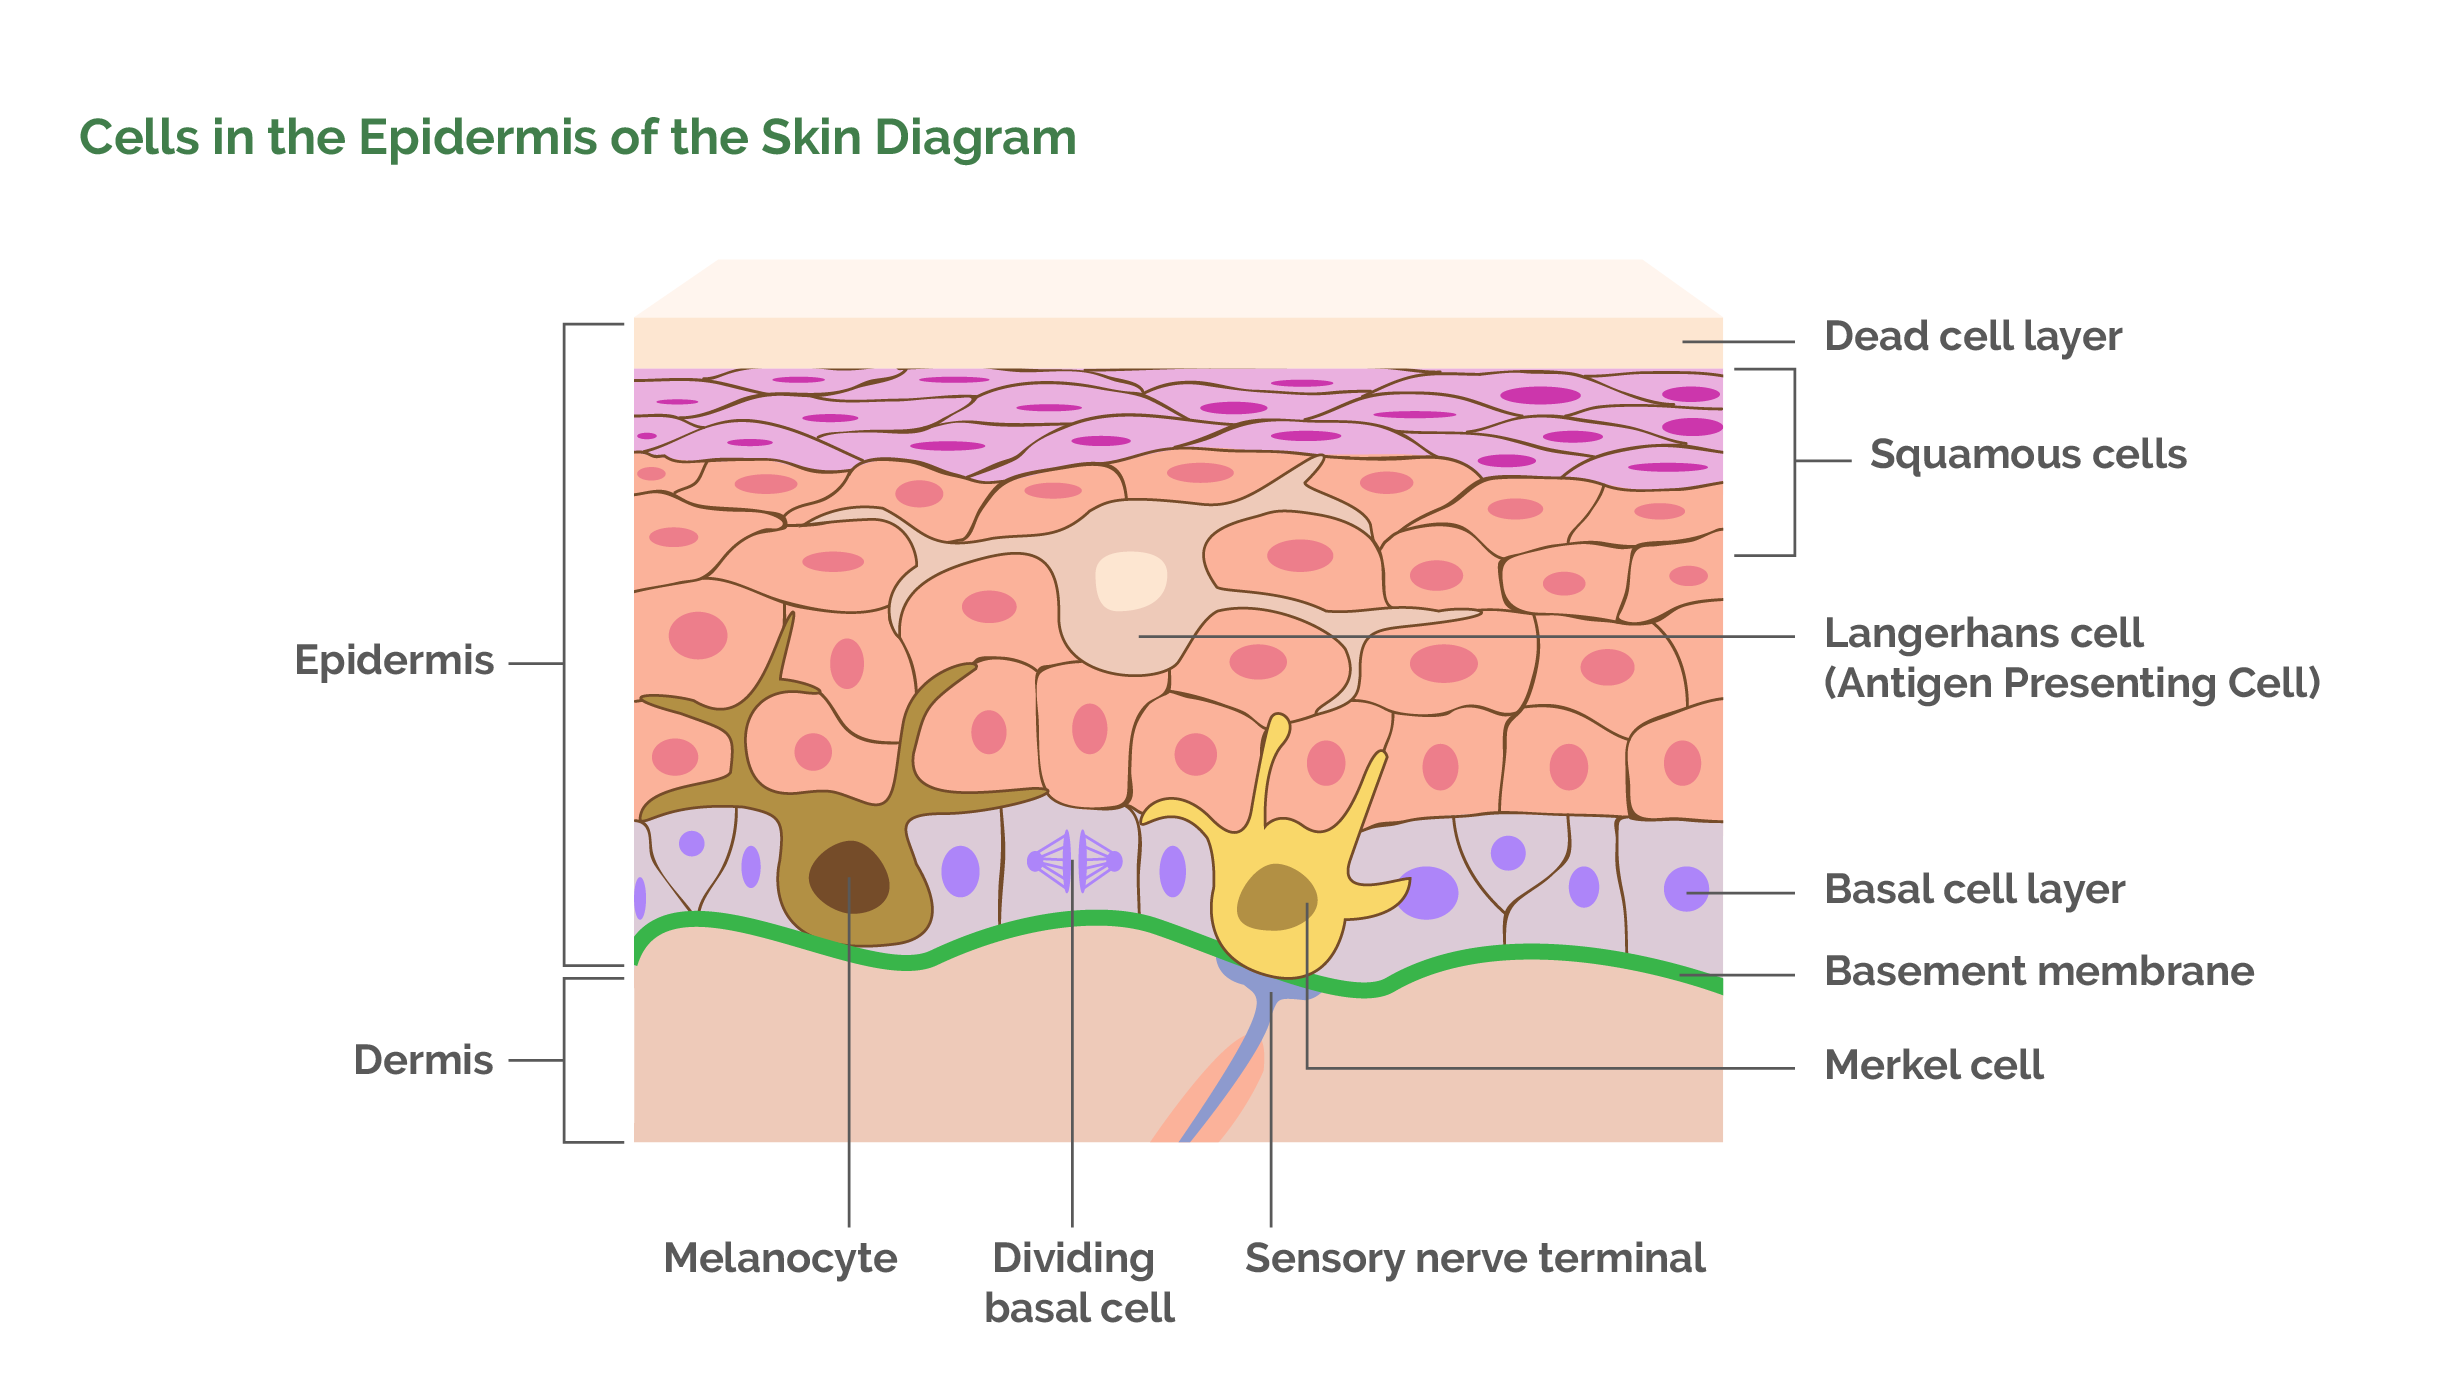 Cells in the Epidermis of the Skin